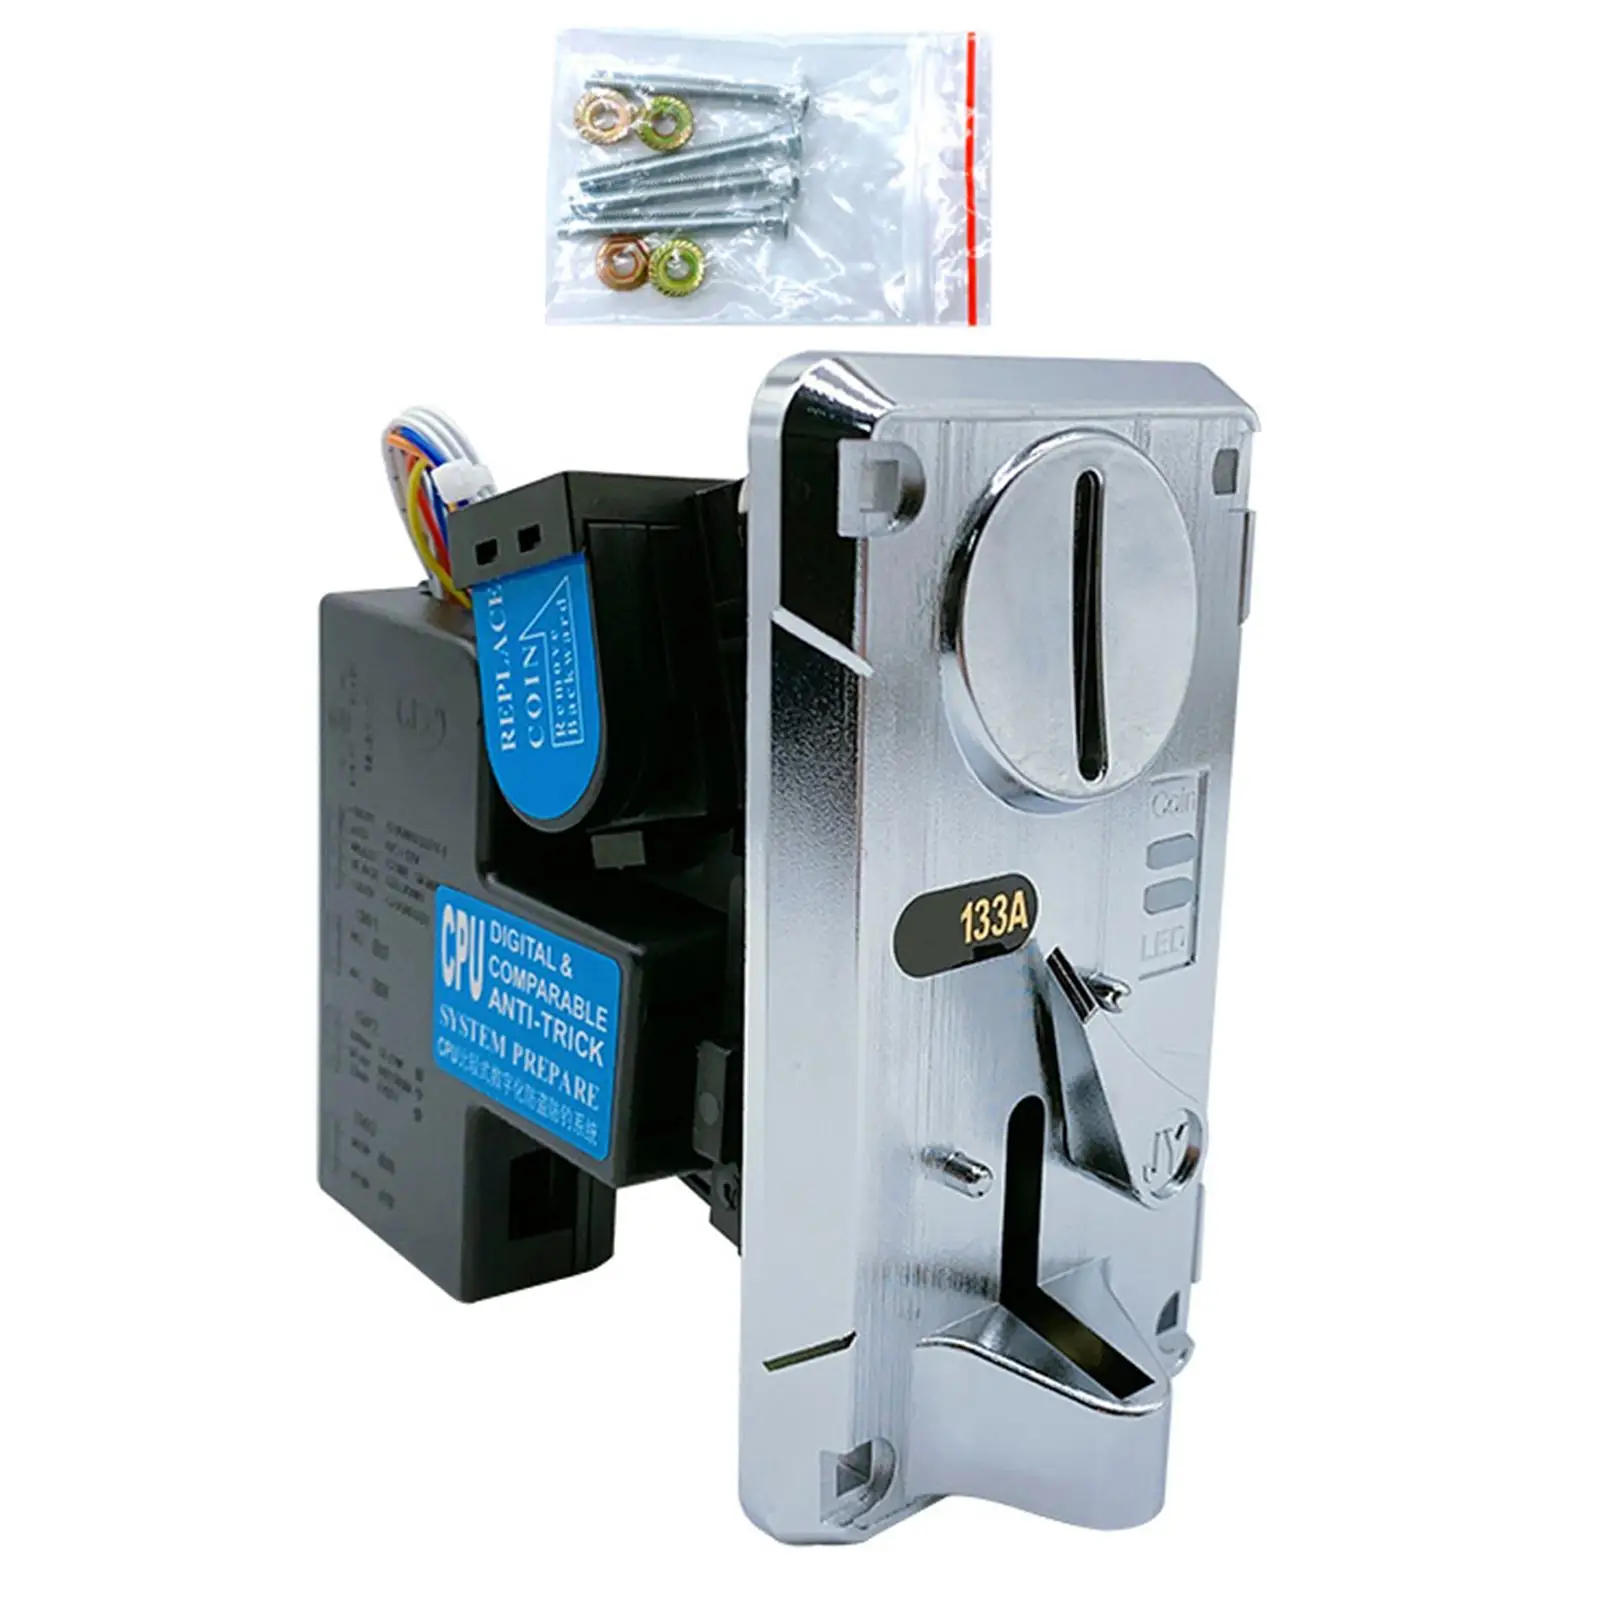 Coin Acceptor Selector for Snack Machine Coin Operated Washing Machines